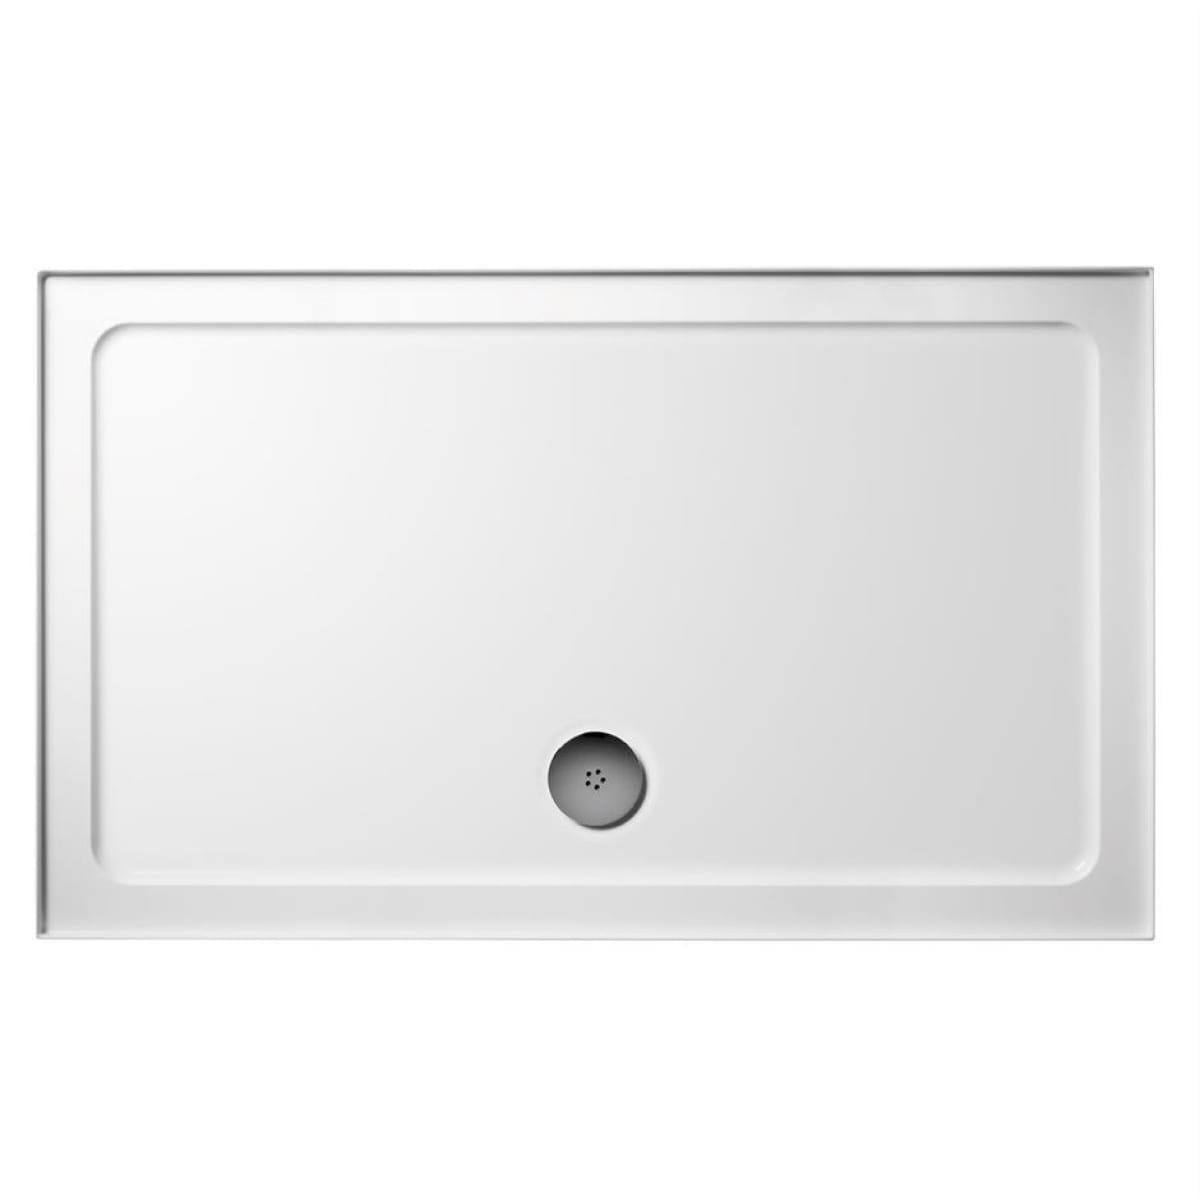 Home Standard 1200mm x 800mm Low Profile Rectangular Shower Tray 